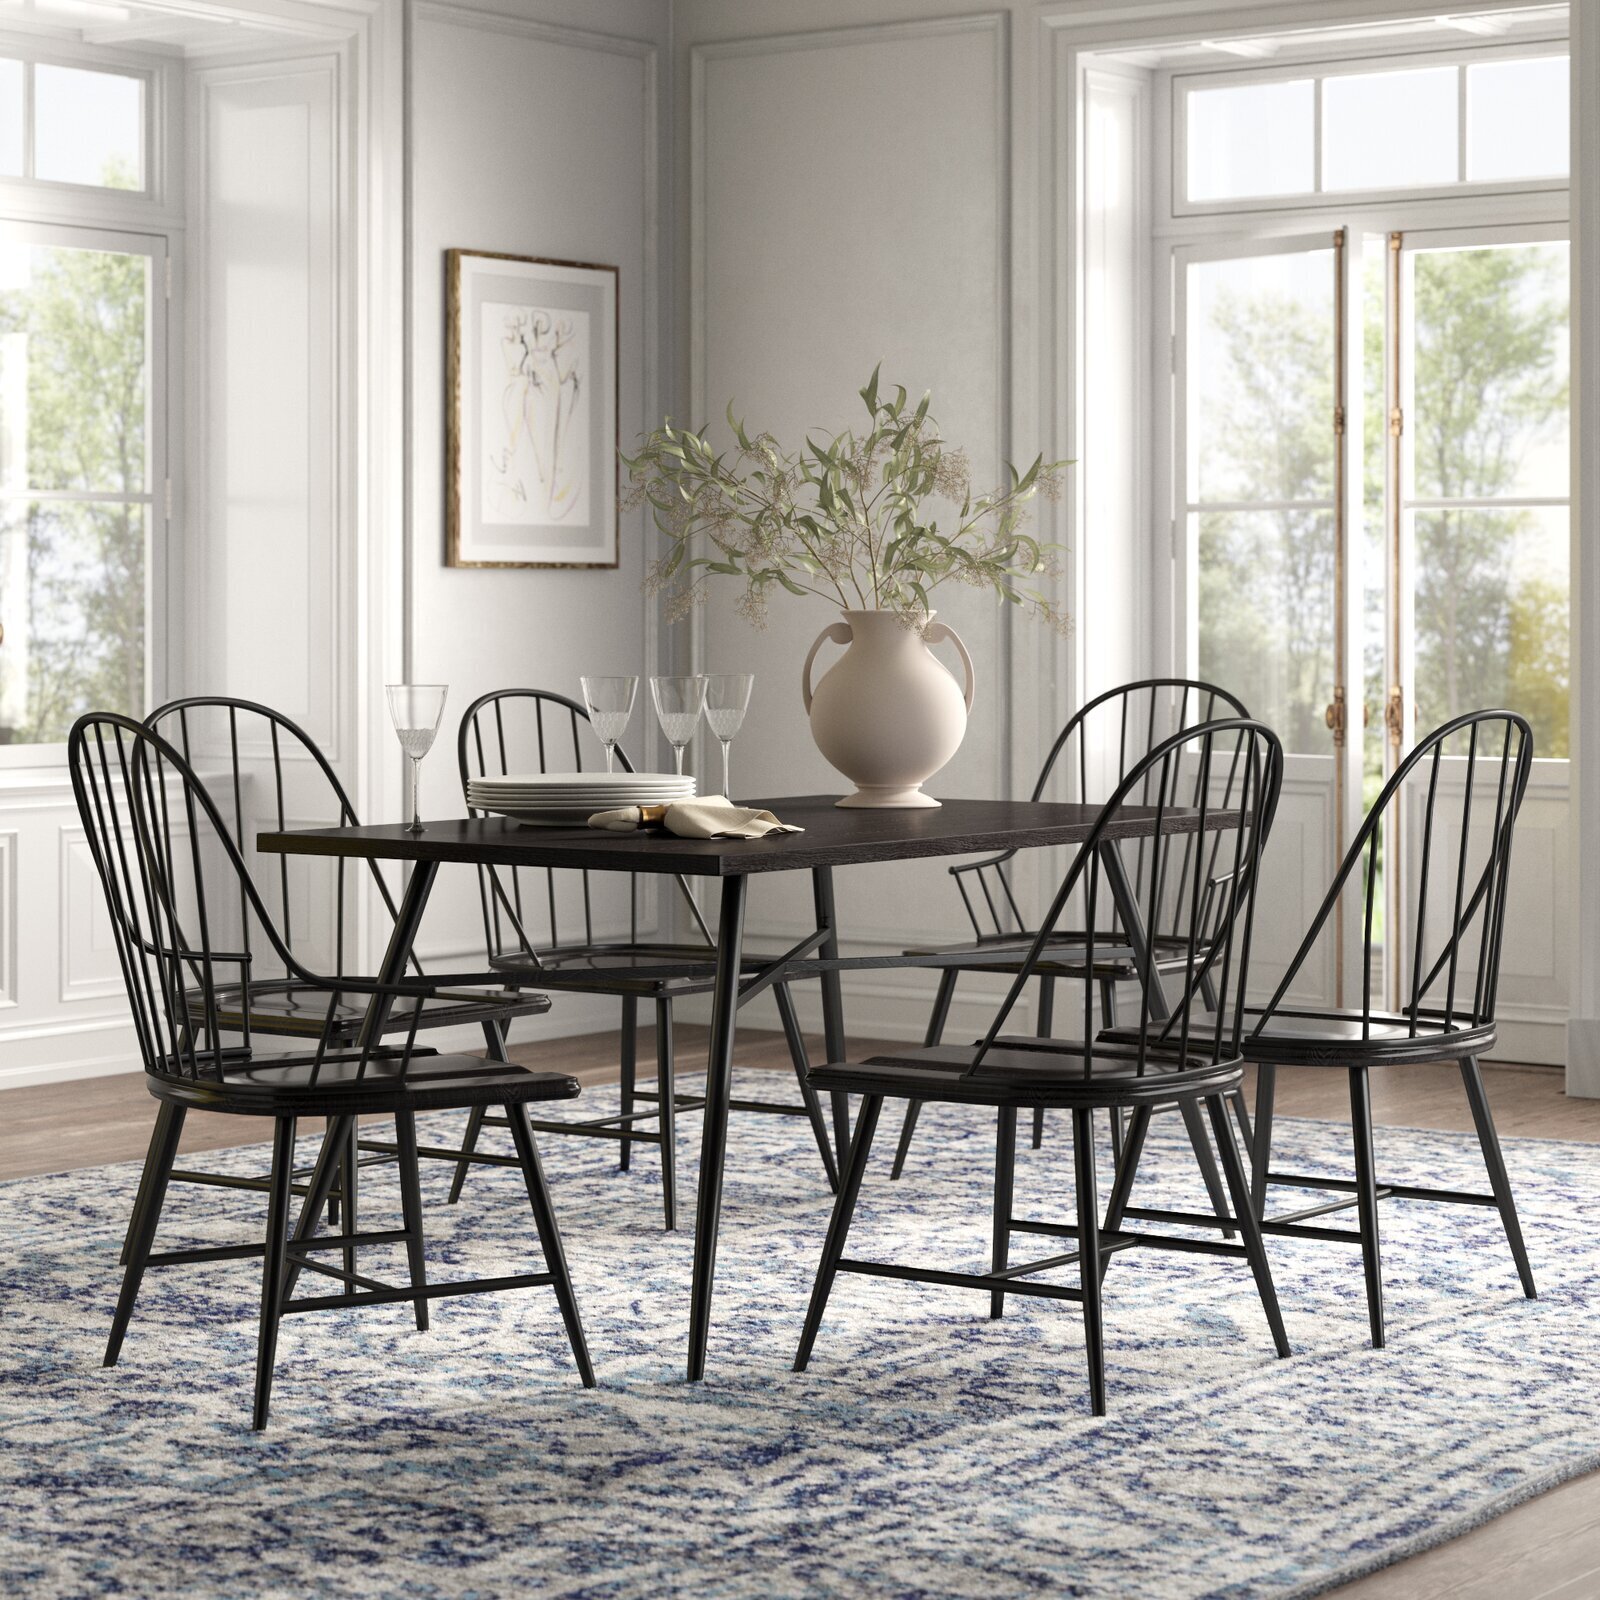 Classic Windsor Dining Table and Chairs